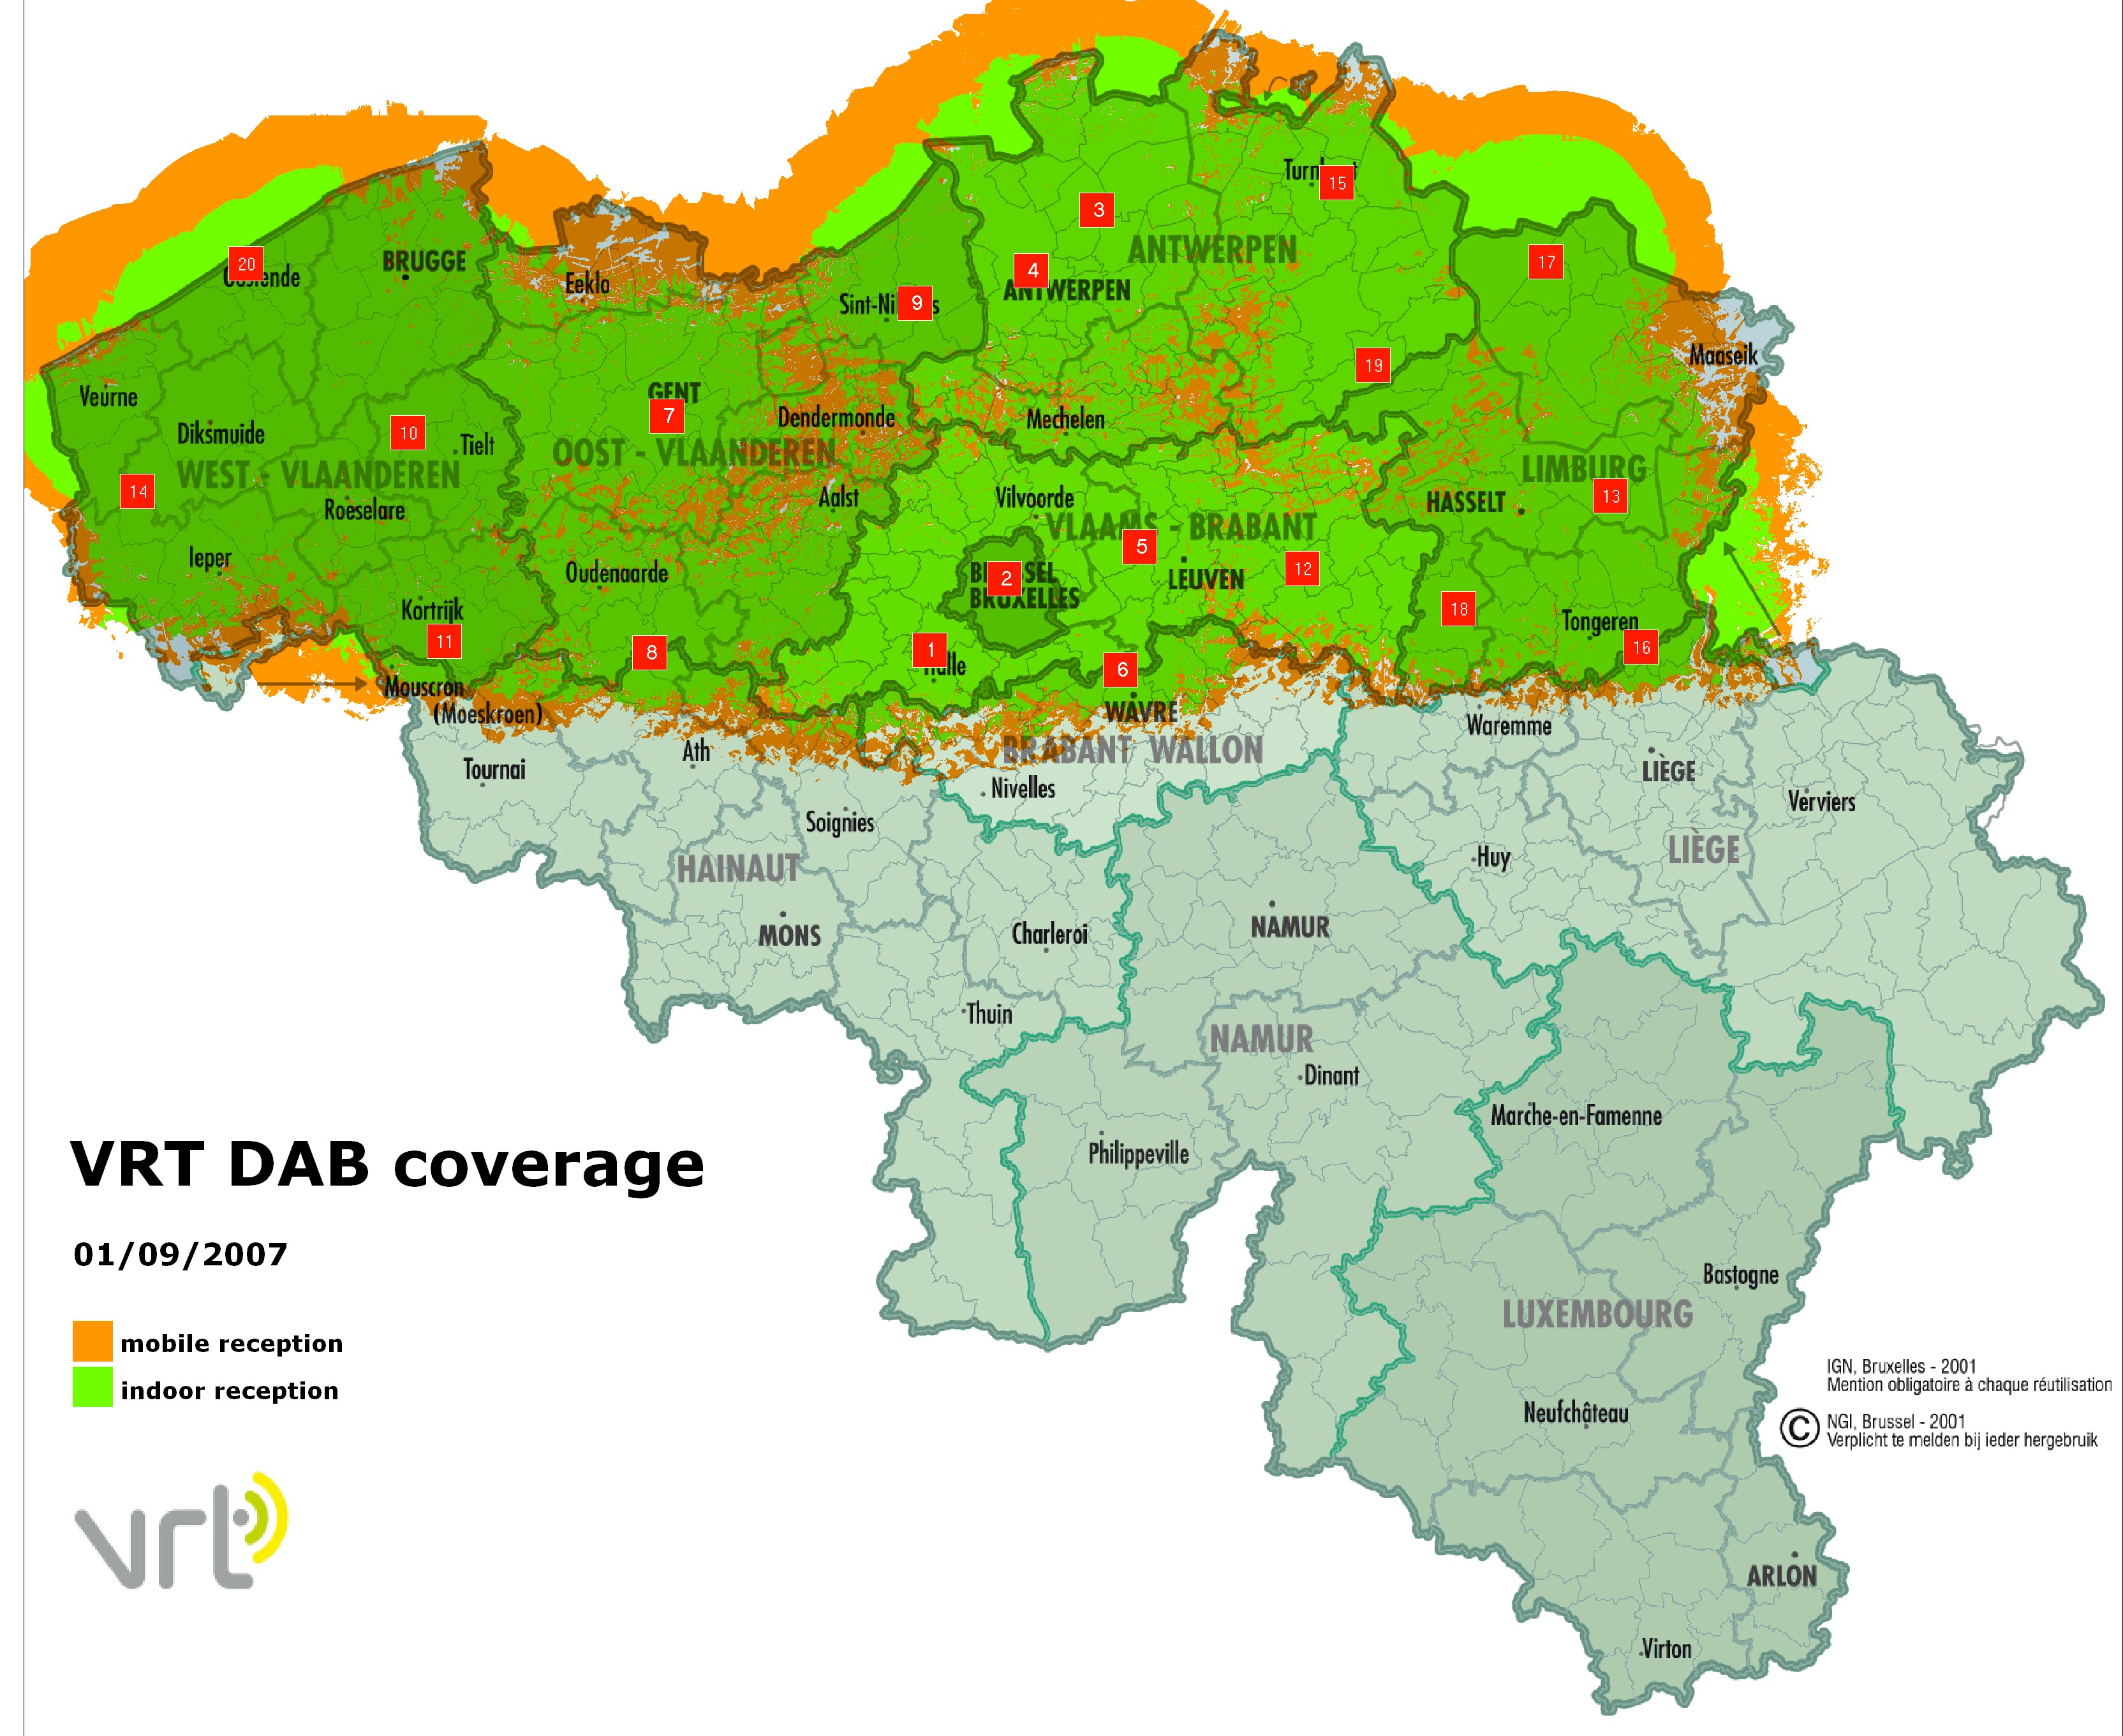 DAB coverage map for the Flemish part of Belgium